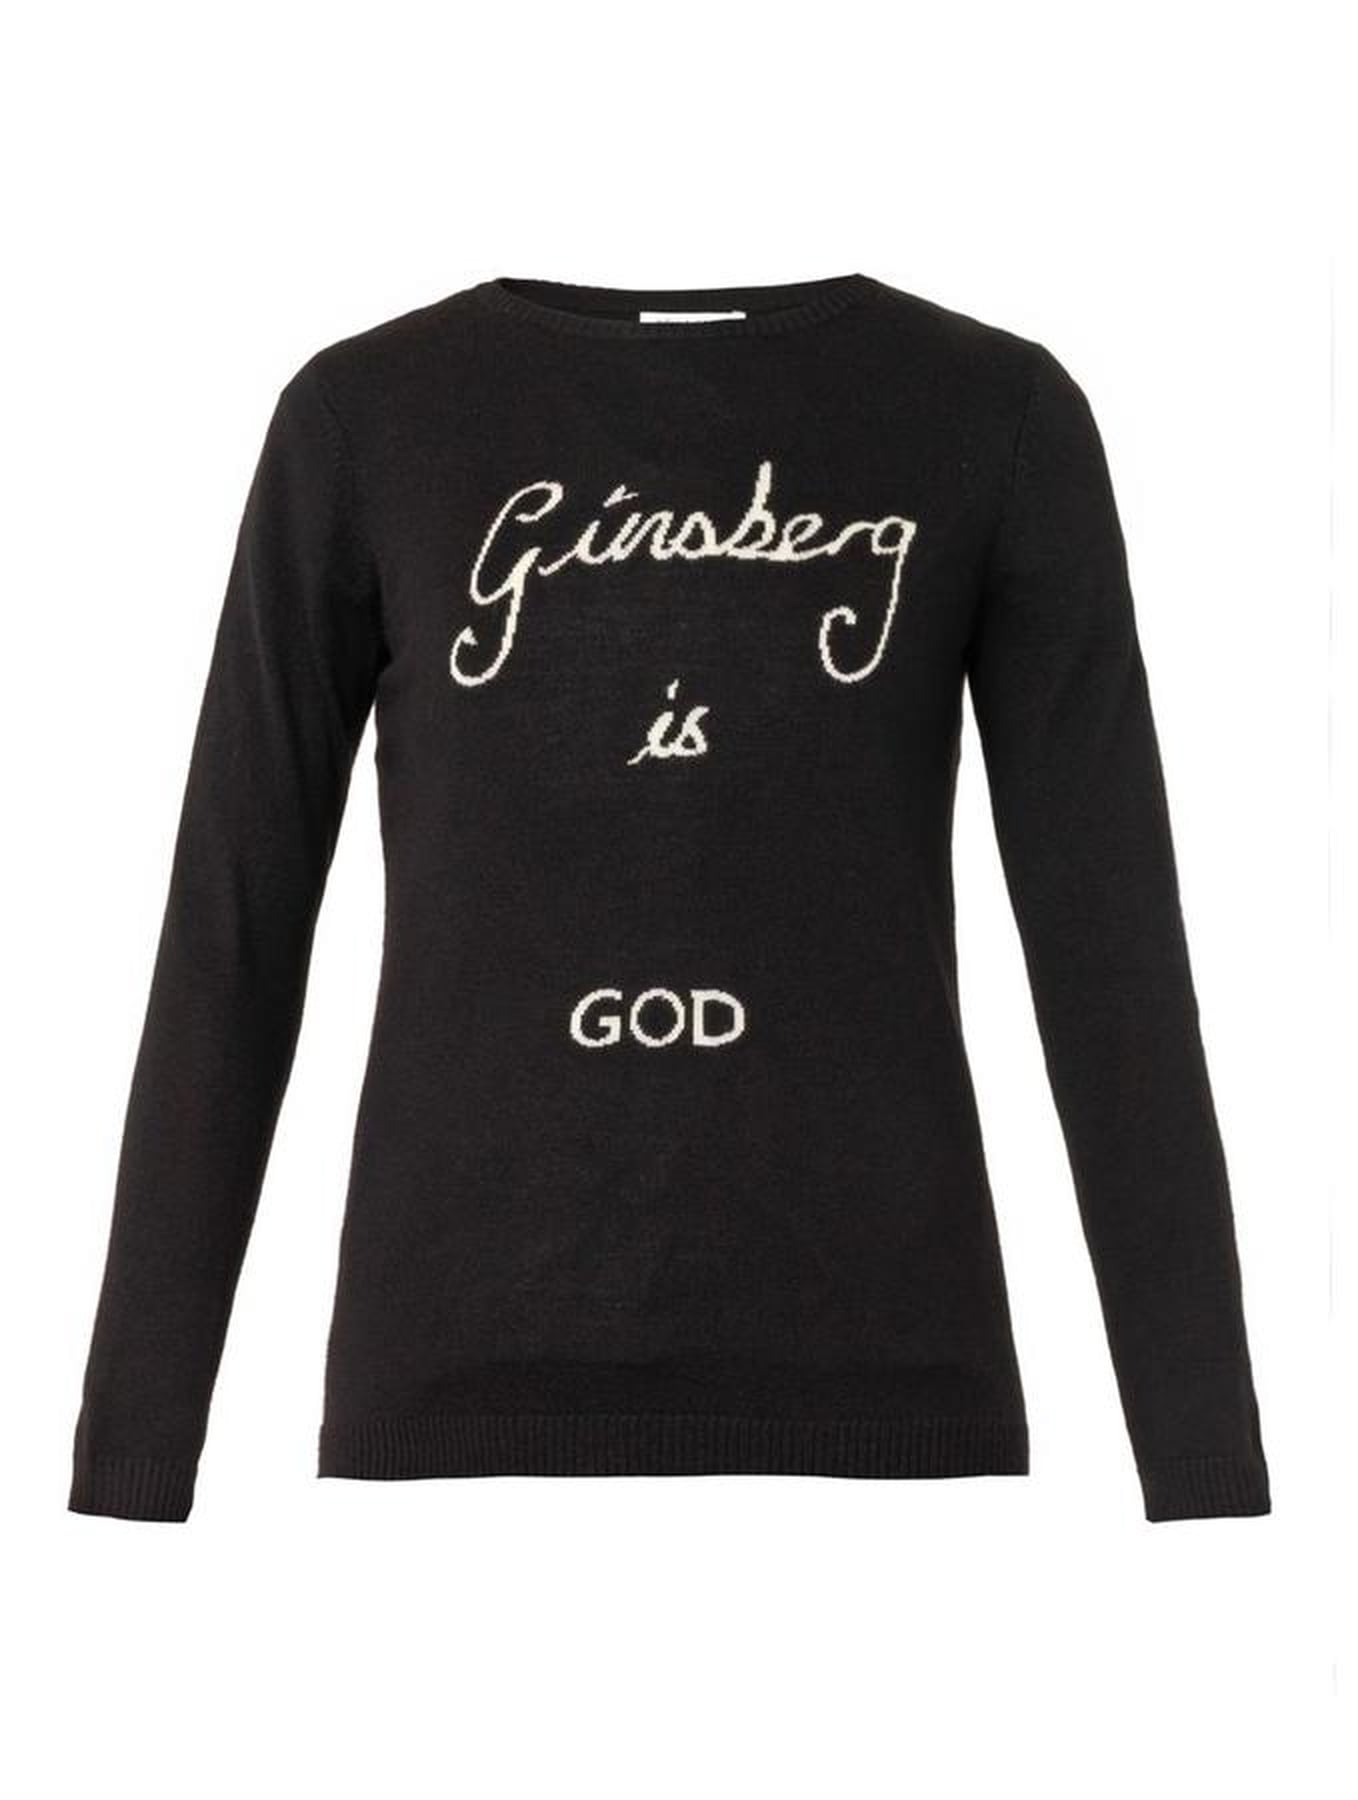 Sweaters and Pullovers With Text Phrases | POPSUGAR Fashion